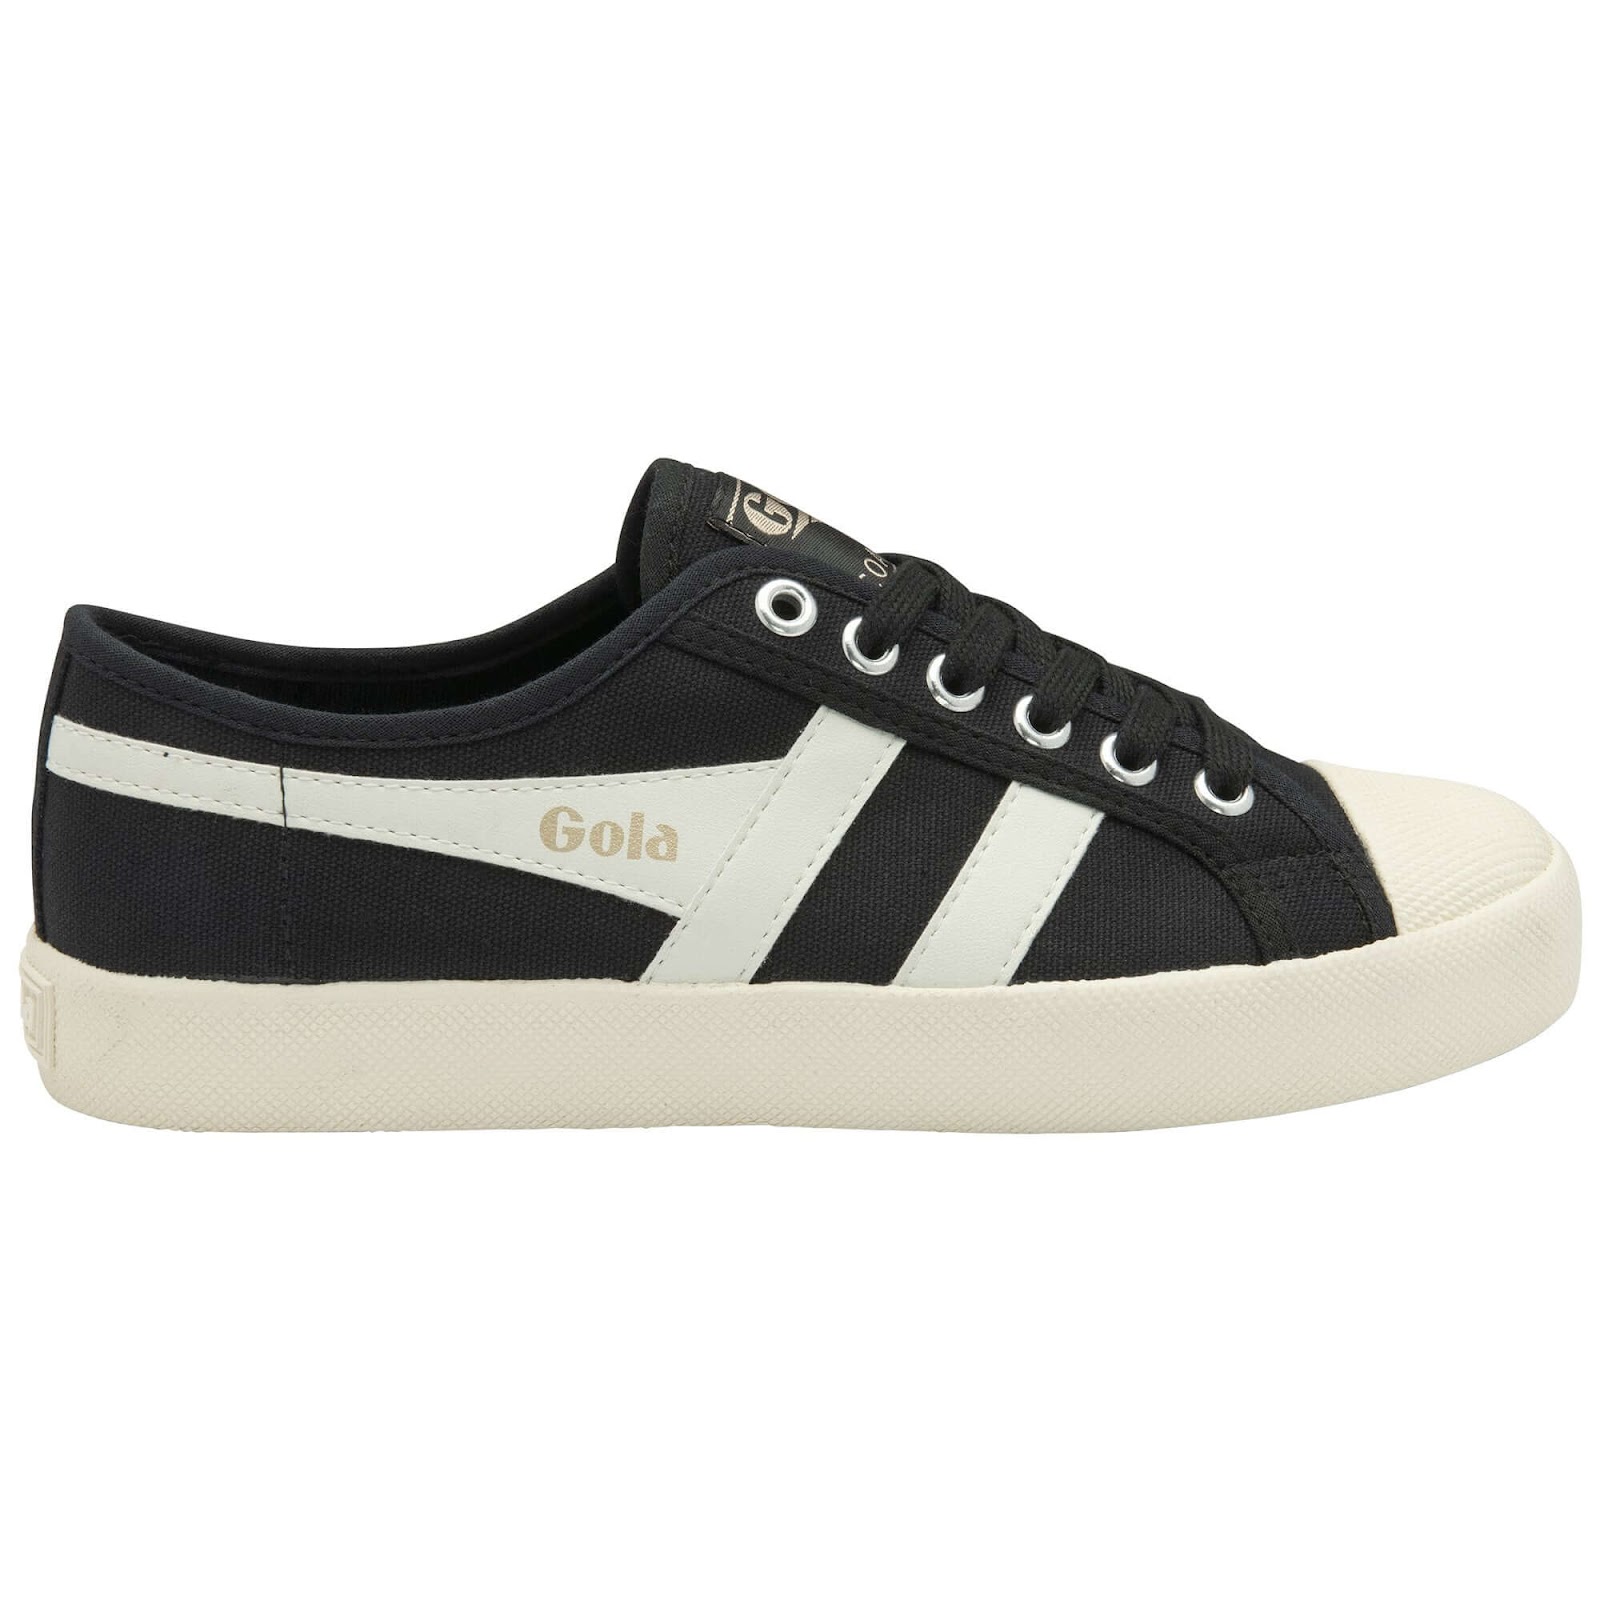 Women's black Gola trainers with white details